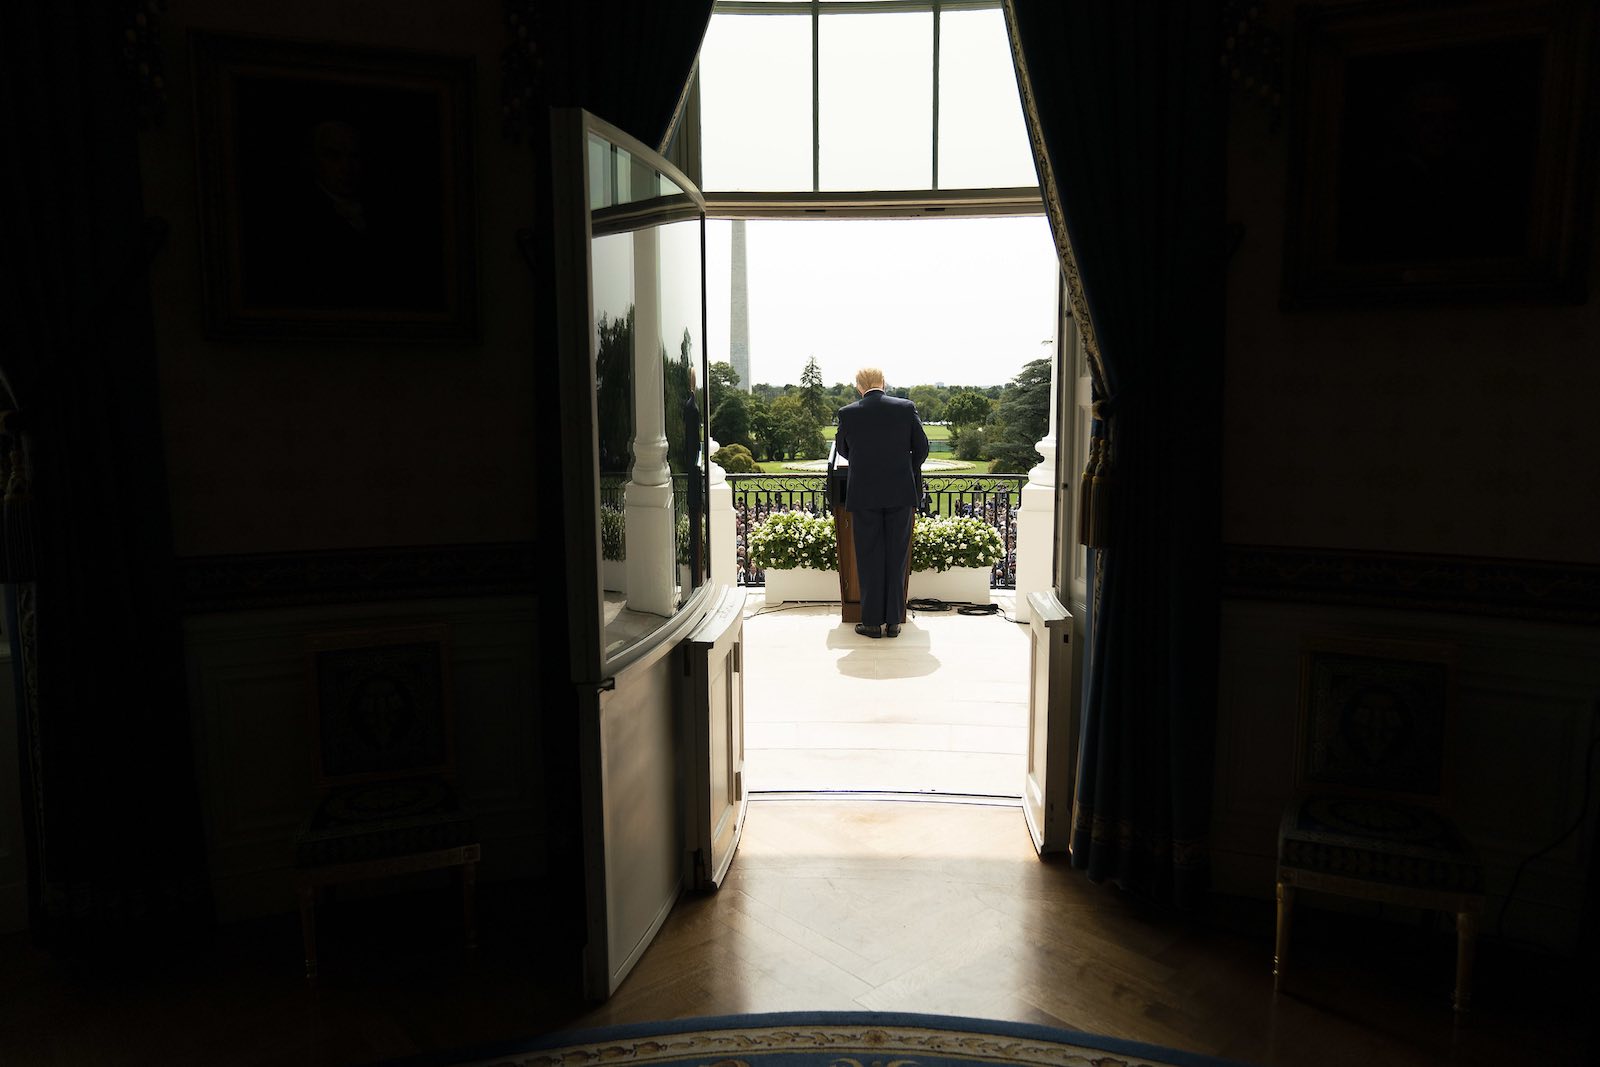 Donald Trump gives a speech from a White House balcony during the Abraham Accords signing ceremony, 15 September 2020 (The White House/Flickr)